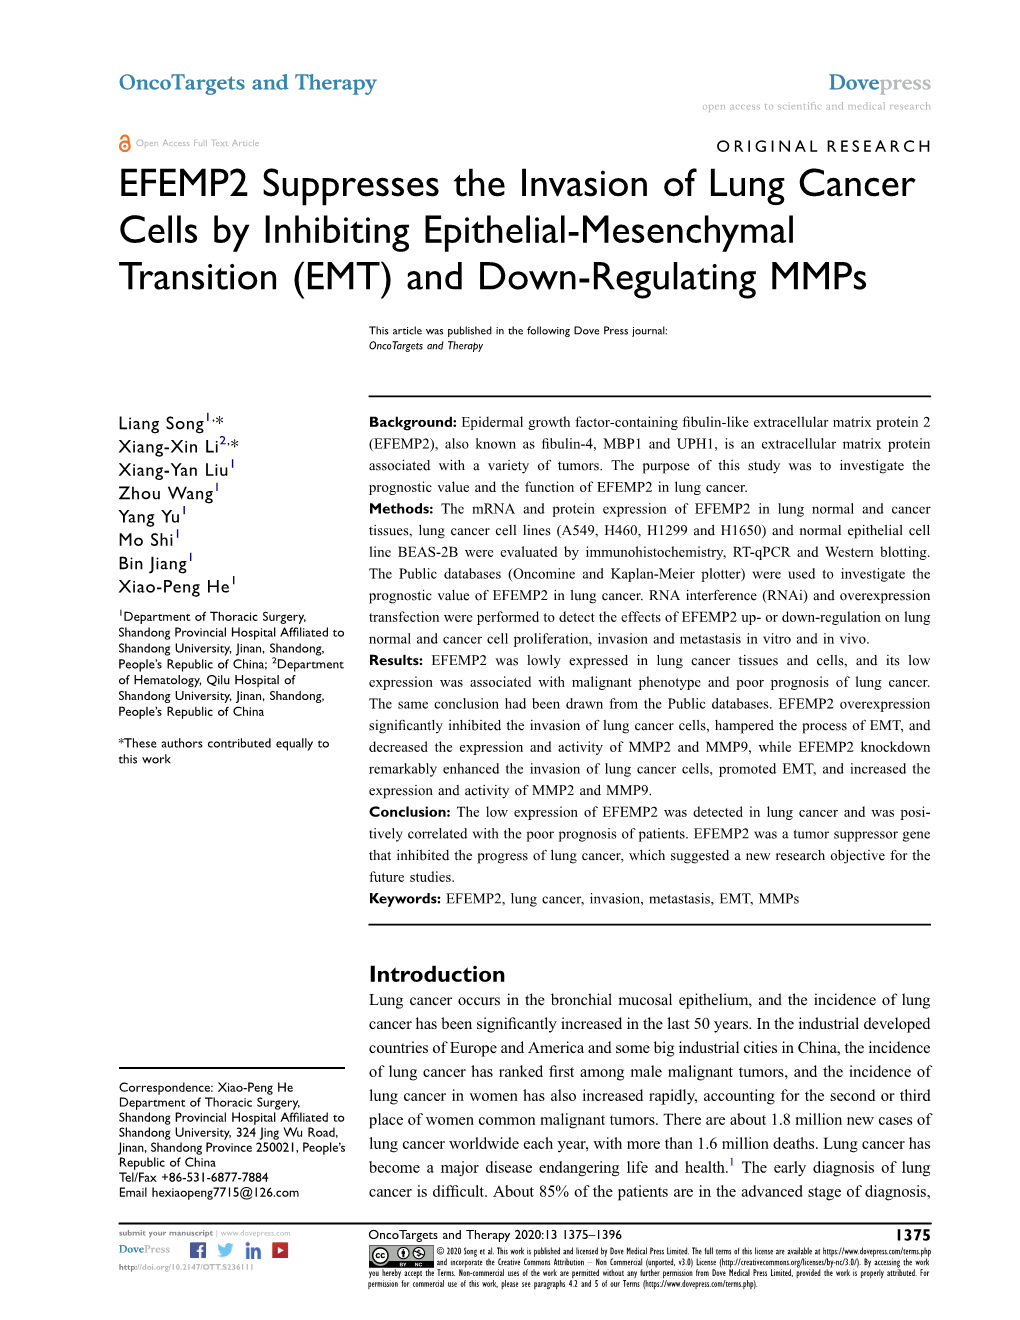 EFEMP2 Suppresses the Invasion of Lung Cancer Cells by Inhibiting Epithelial-Mesenchymal Transition (EMT) and Down-Regulating Mmps